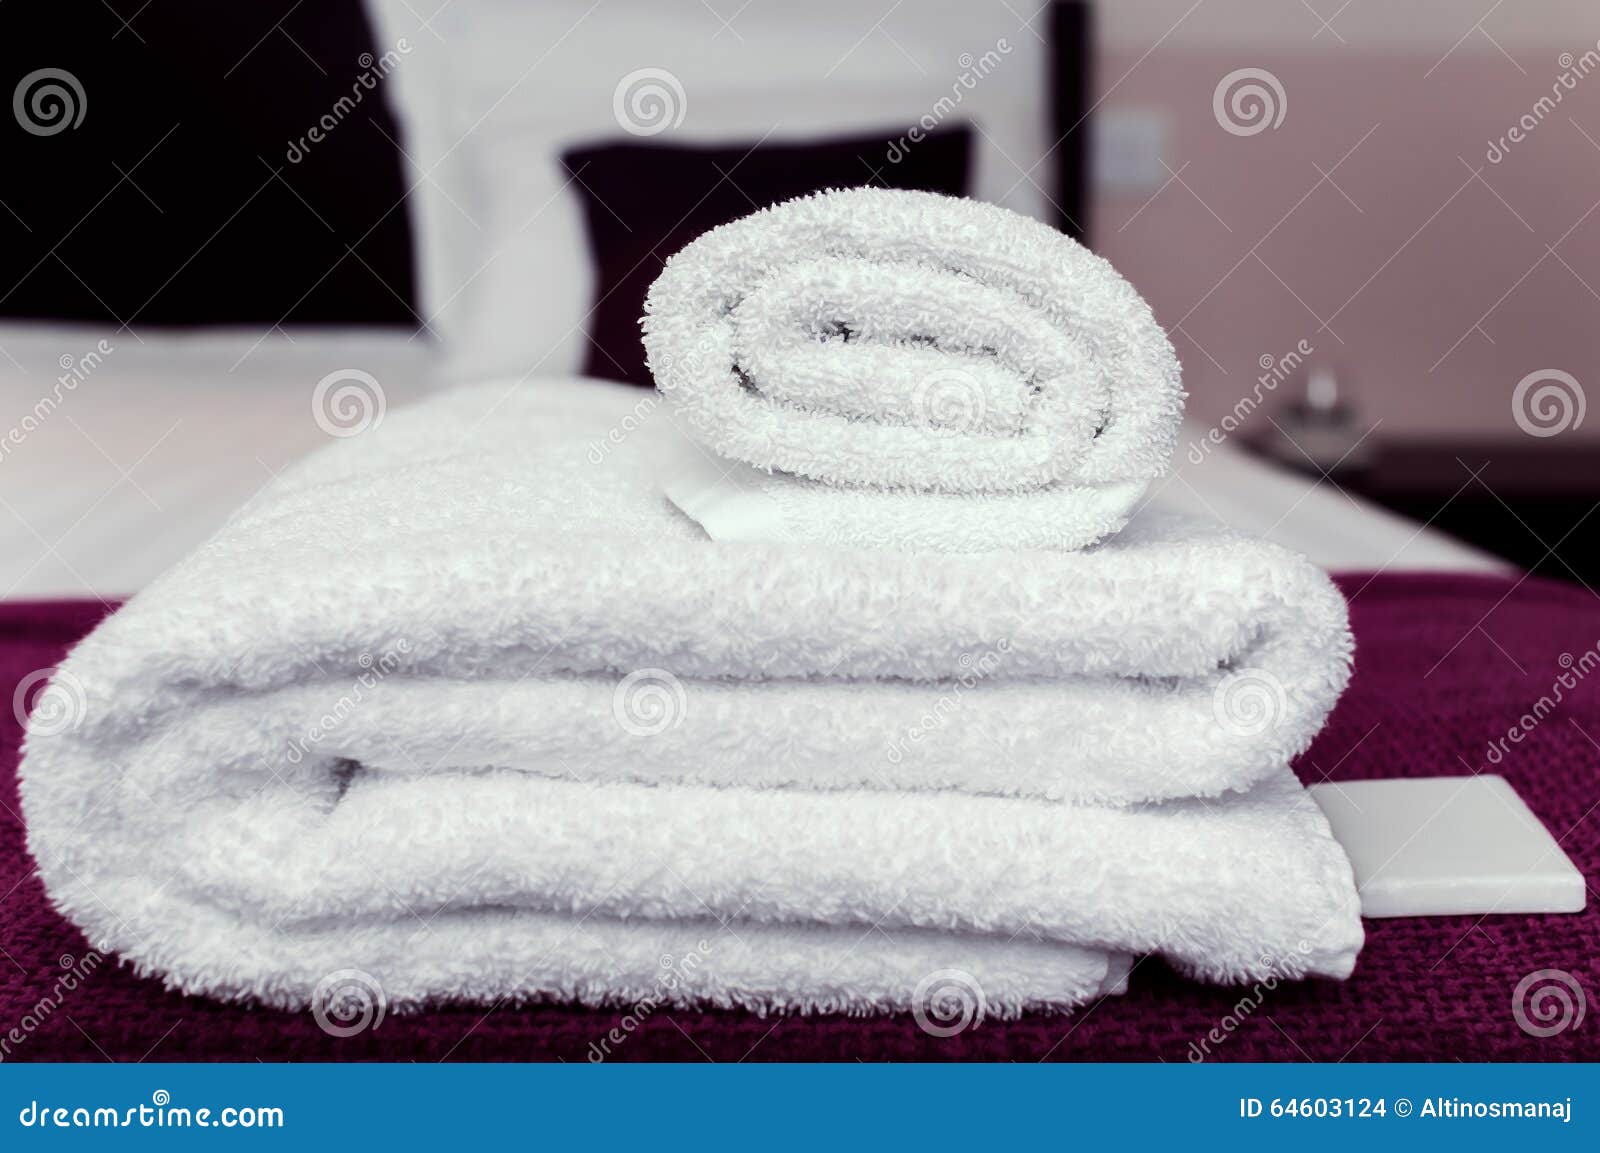 closeup clean towels and soap in hotel room hygiene and hospitality concept